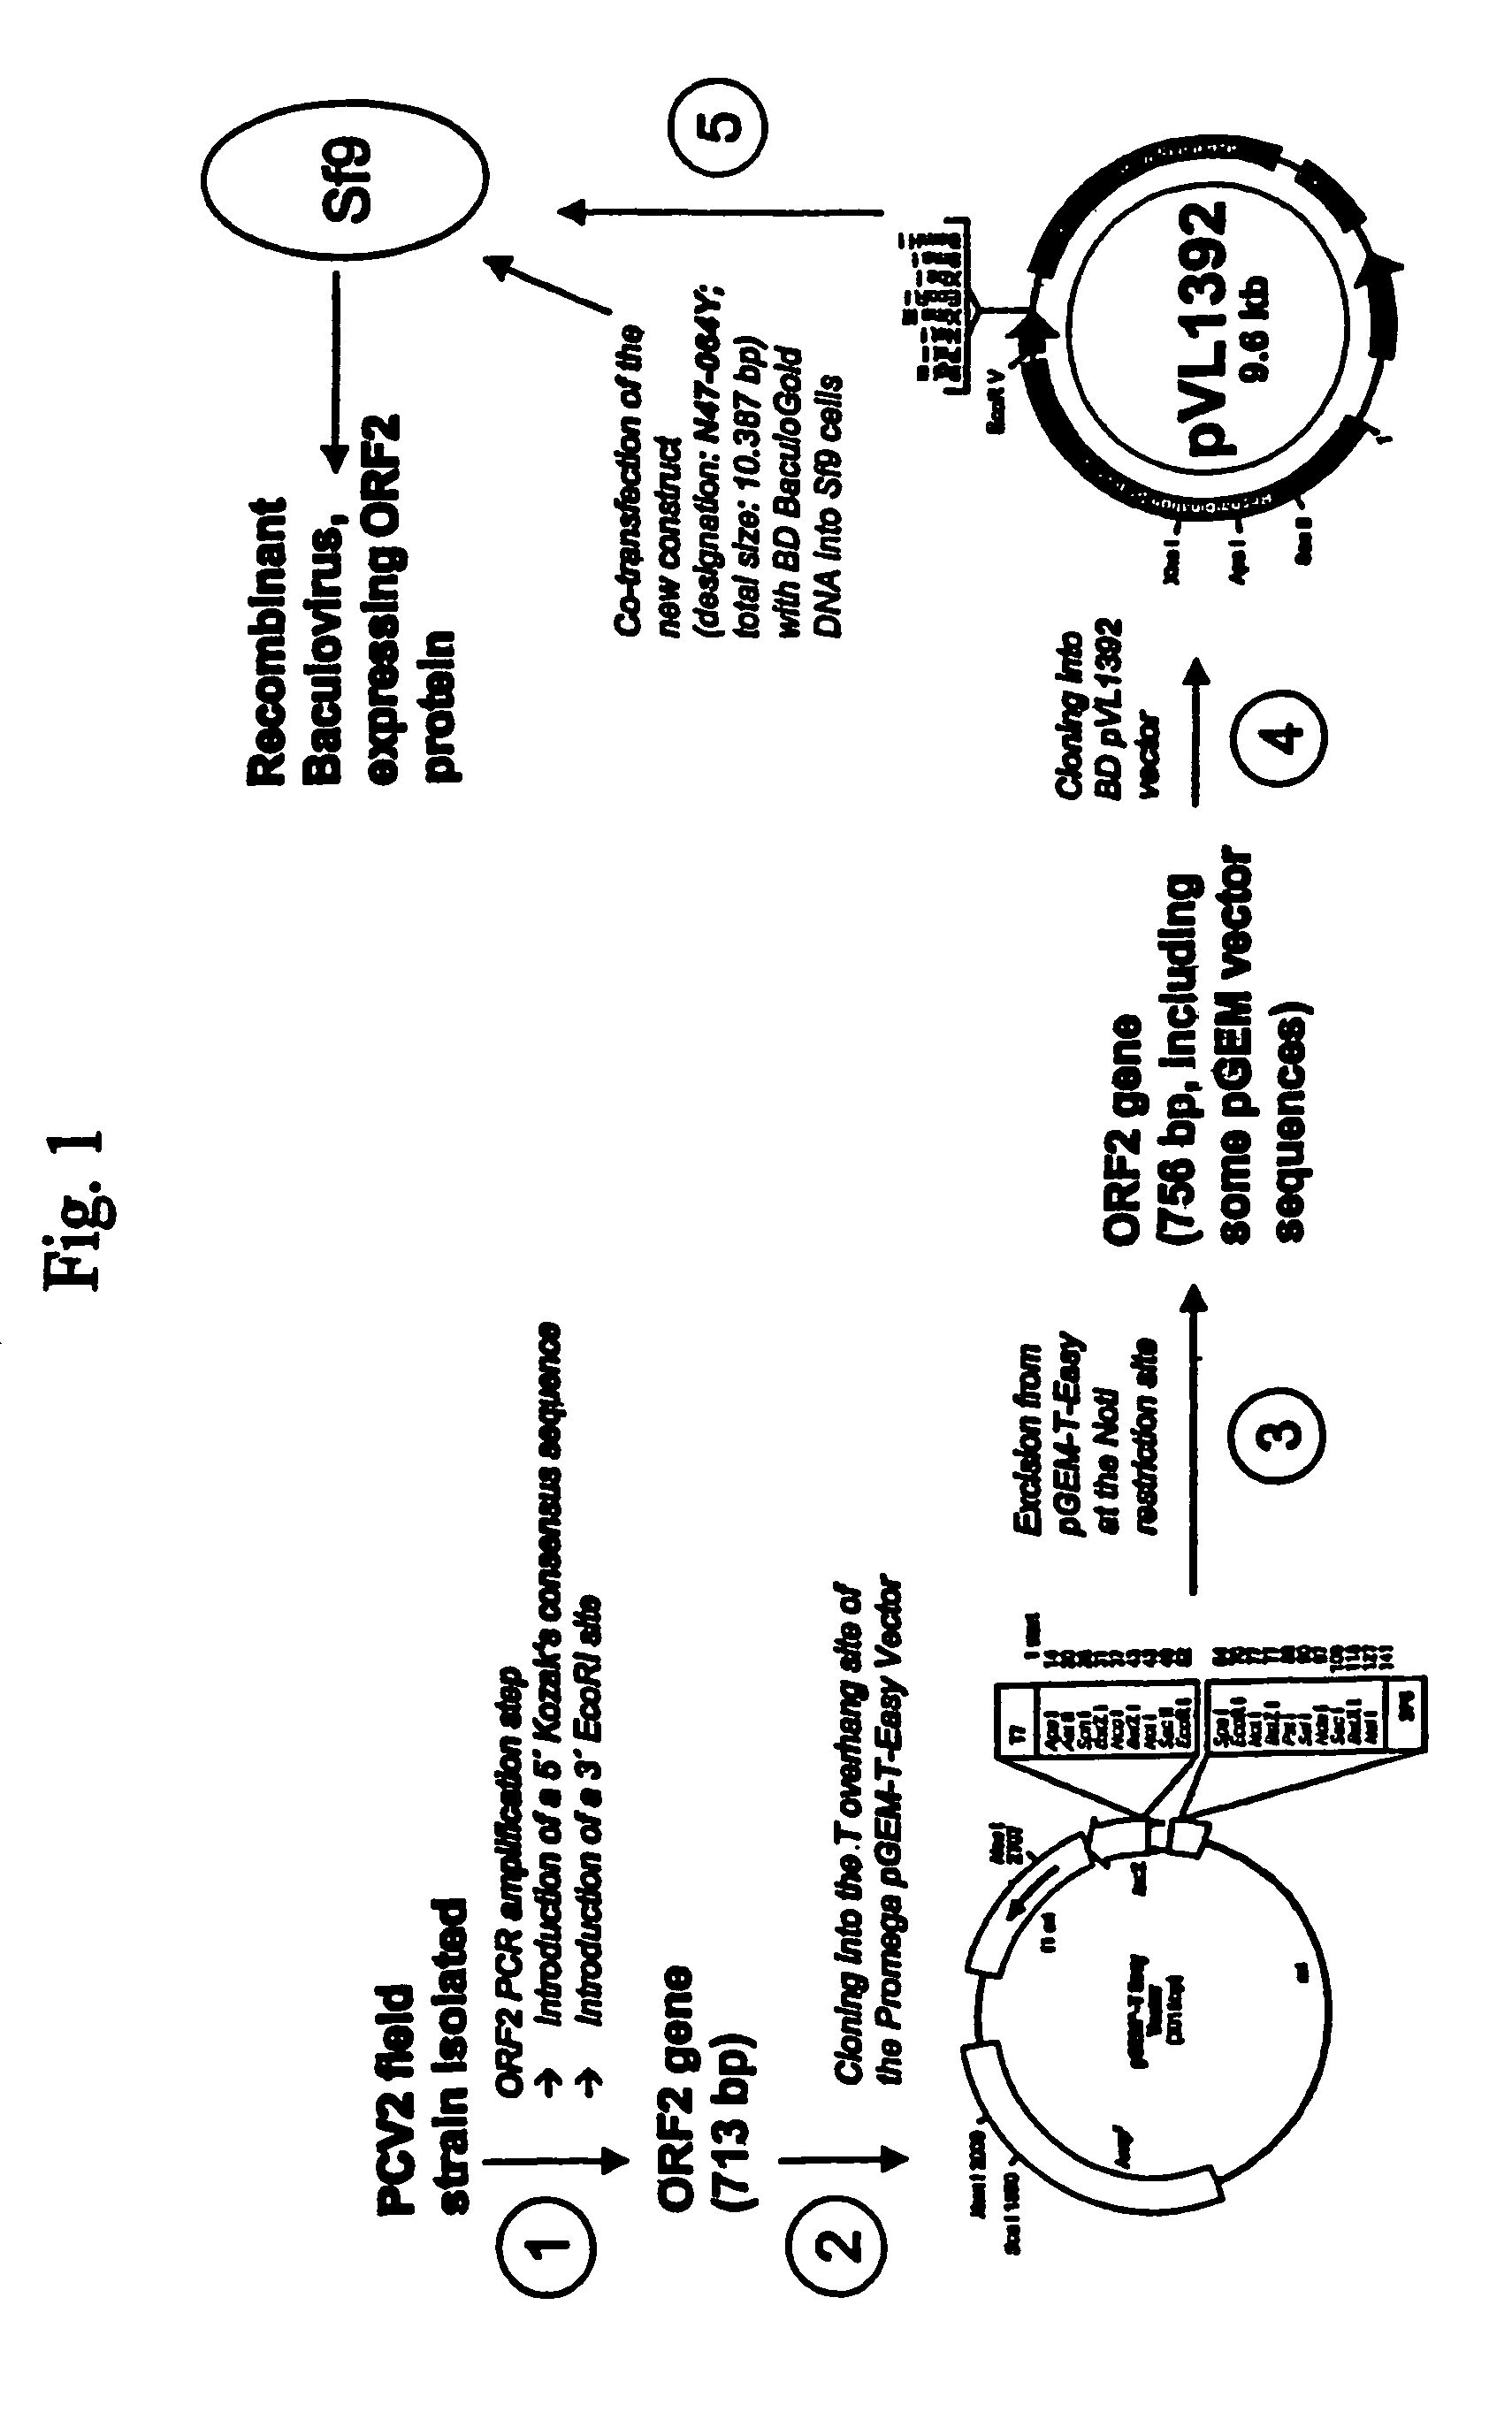 PCV2 immunogenic compositions and methods of producing such compositions